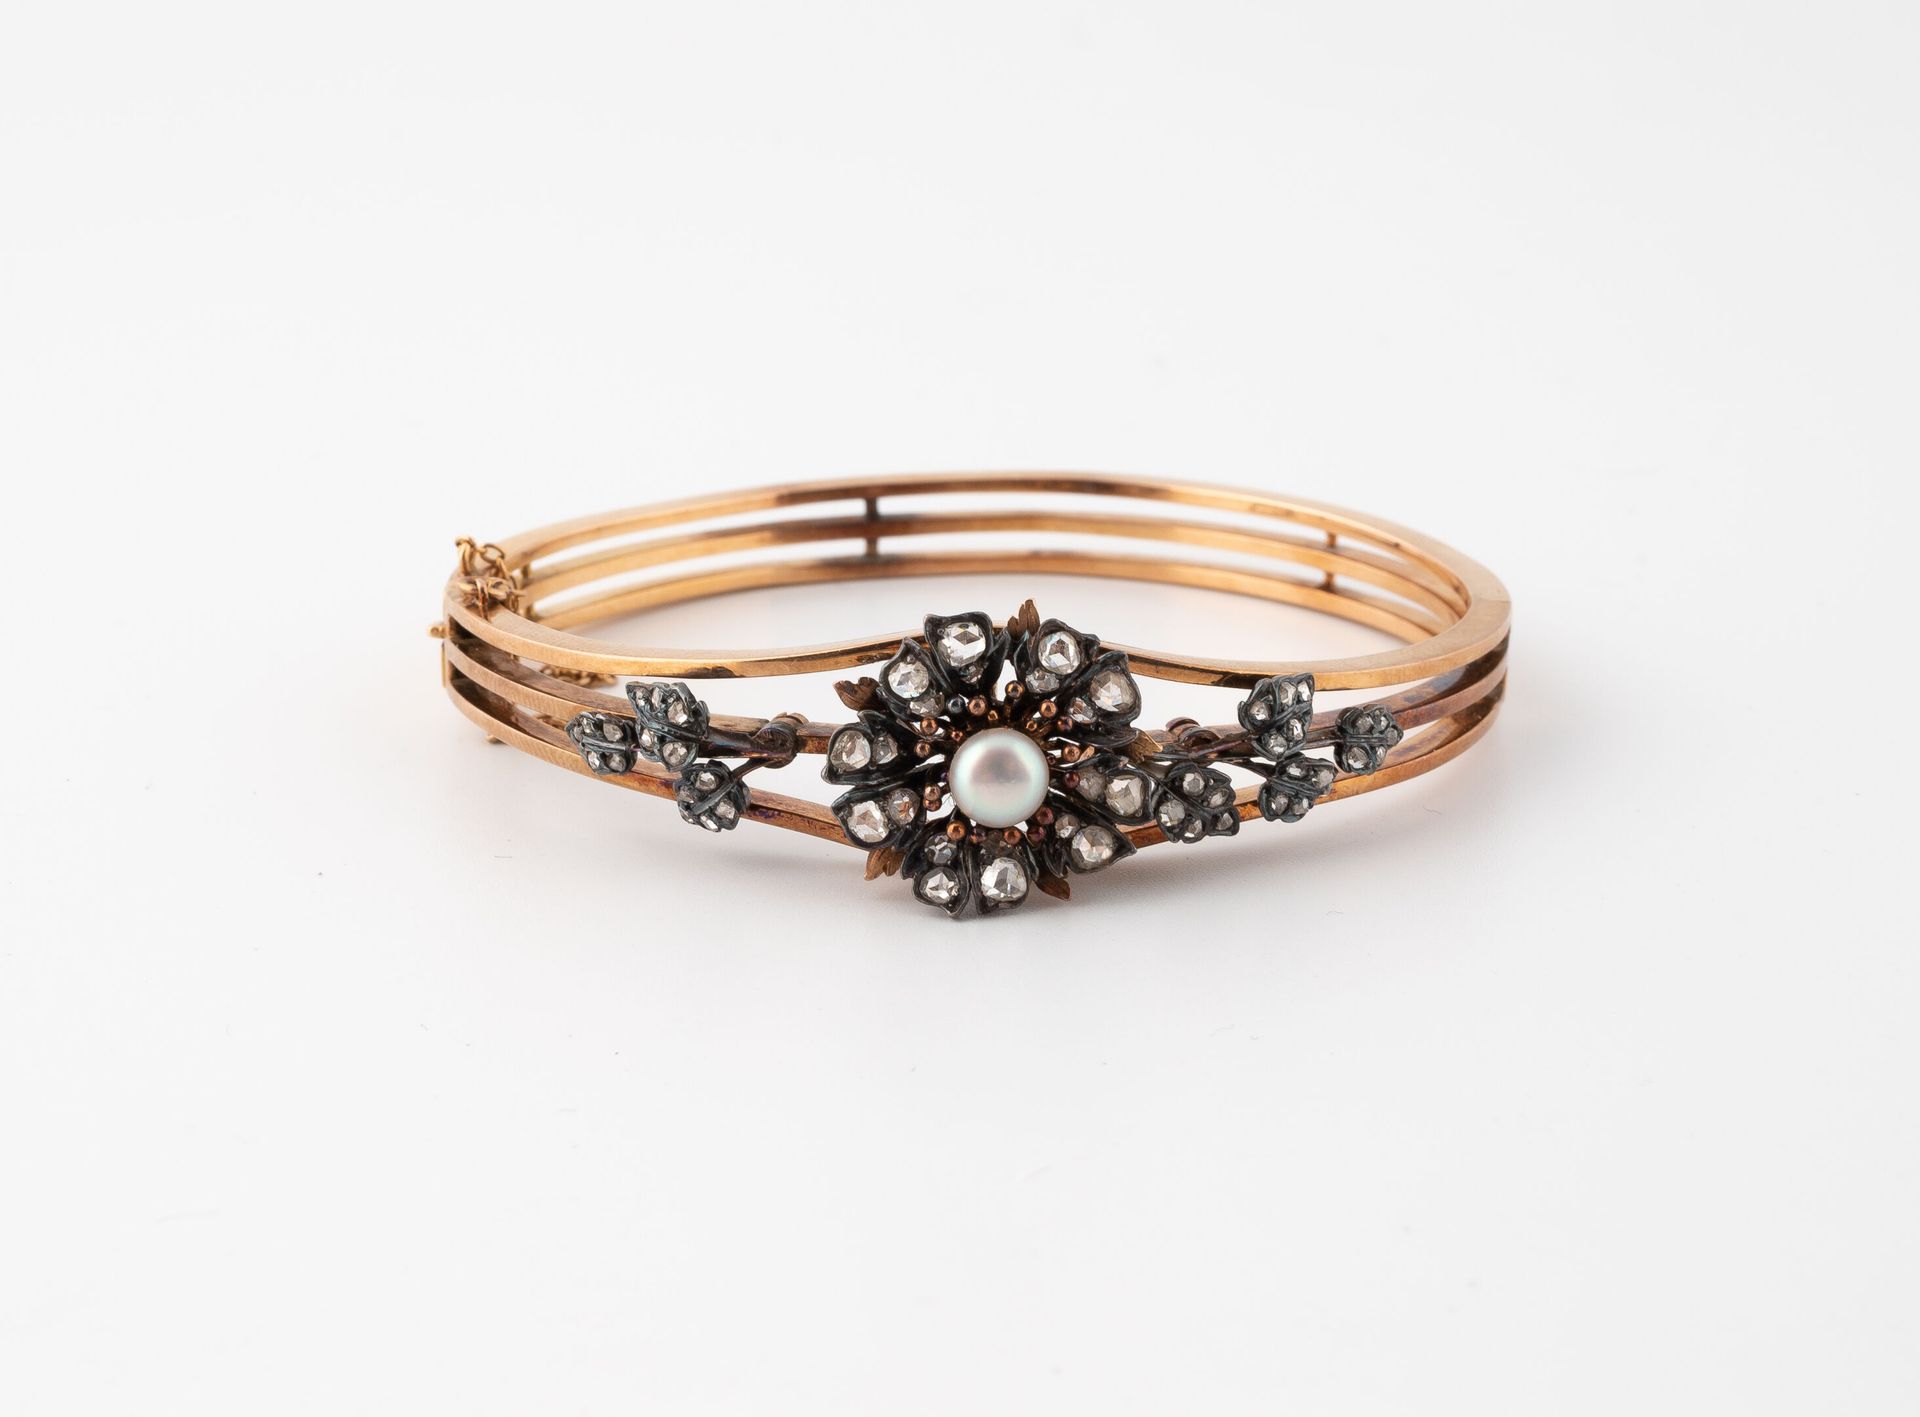 Null Rigid bracelet in yellow gold (750) and silver (925) adorned with flower bu&hellip;